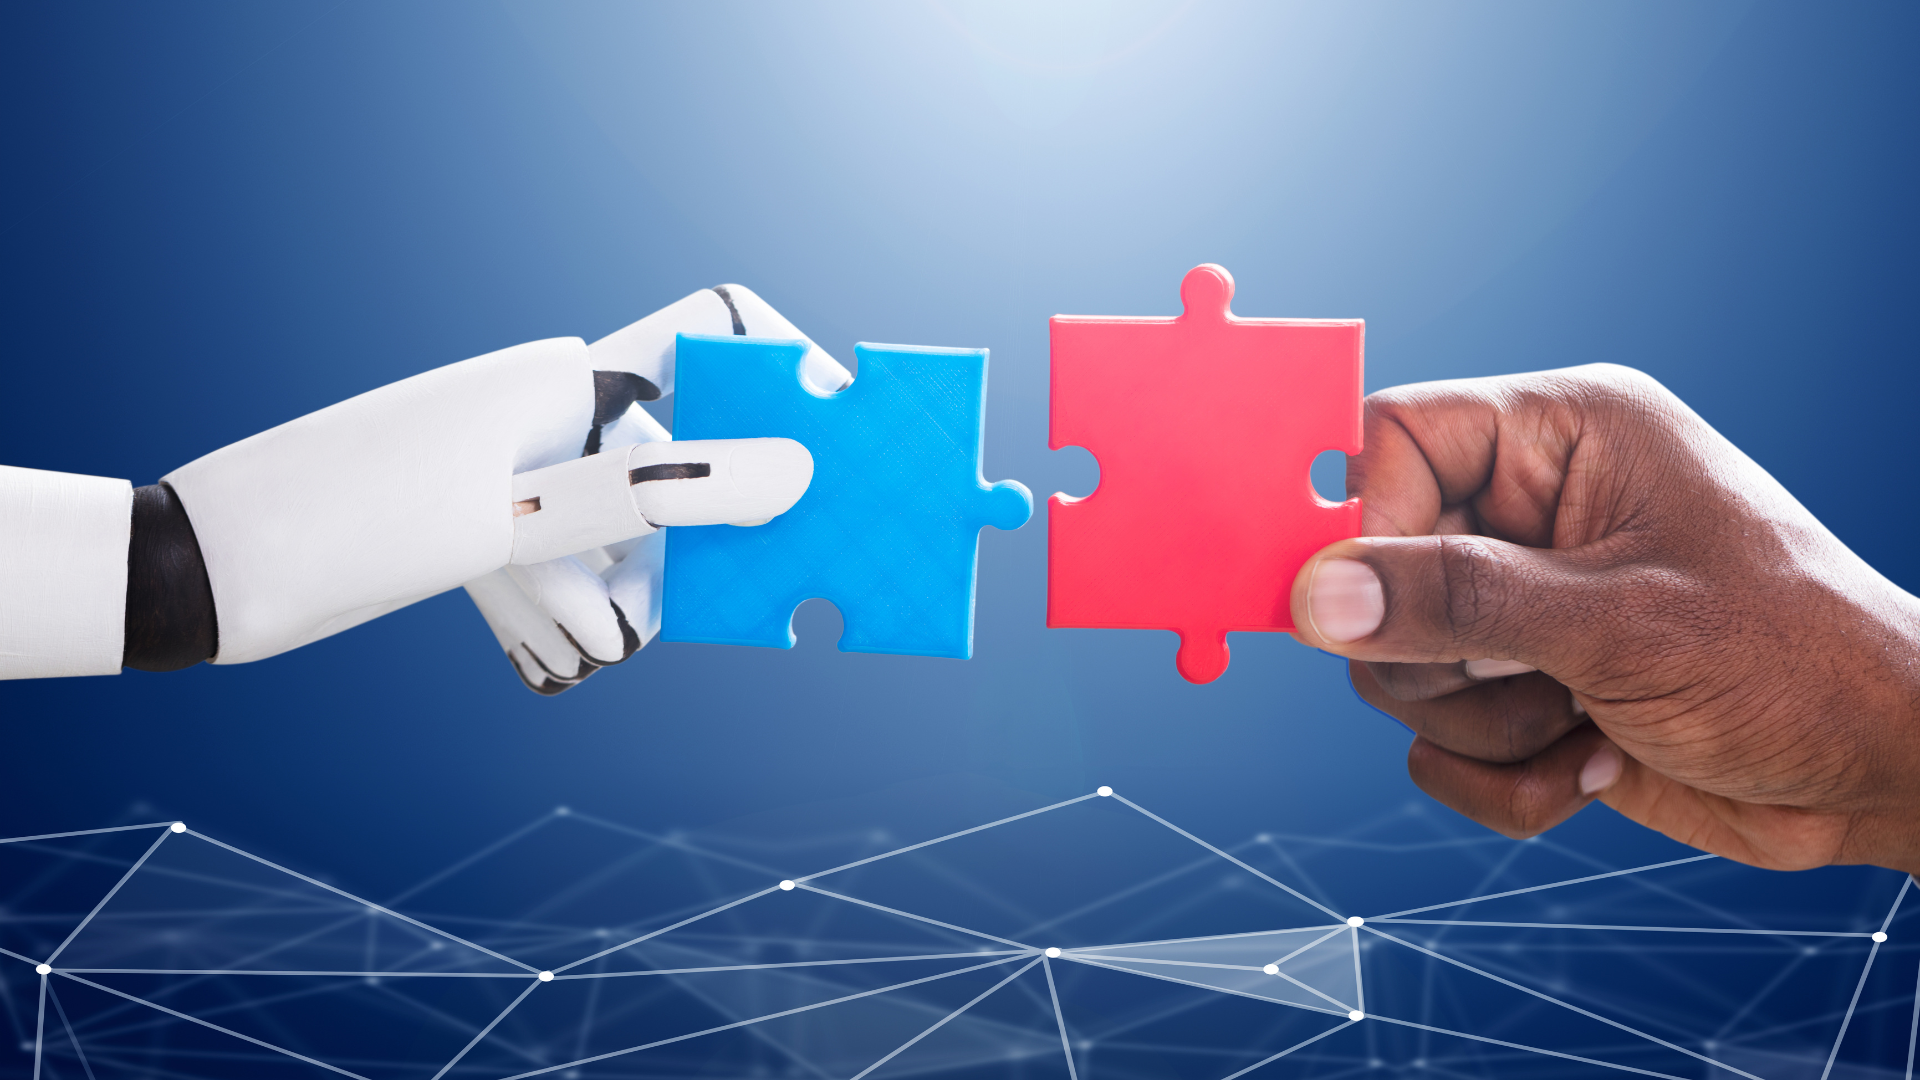 A robot hand holding a blue jigsaw piece, connecting it to a red jigsaw piece that is held by a human hand